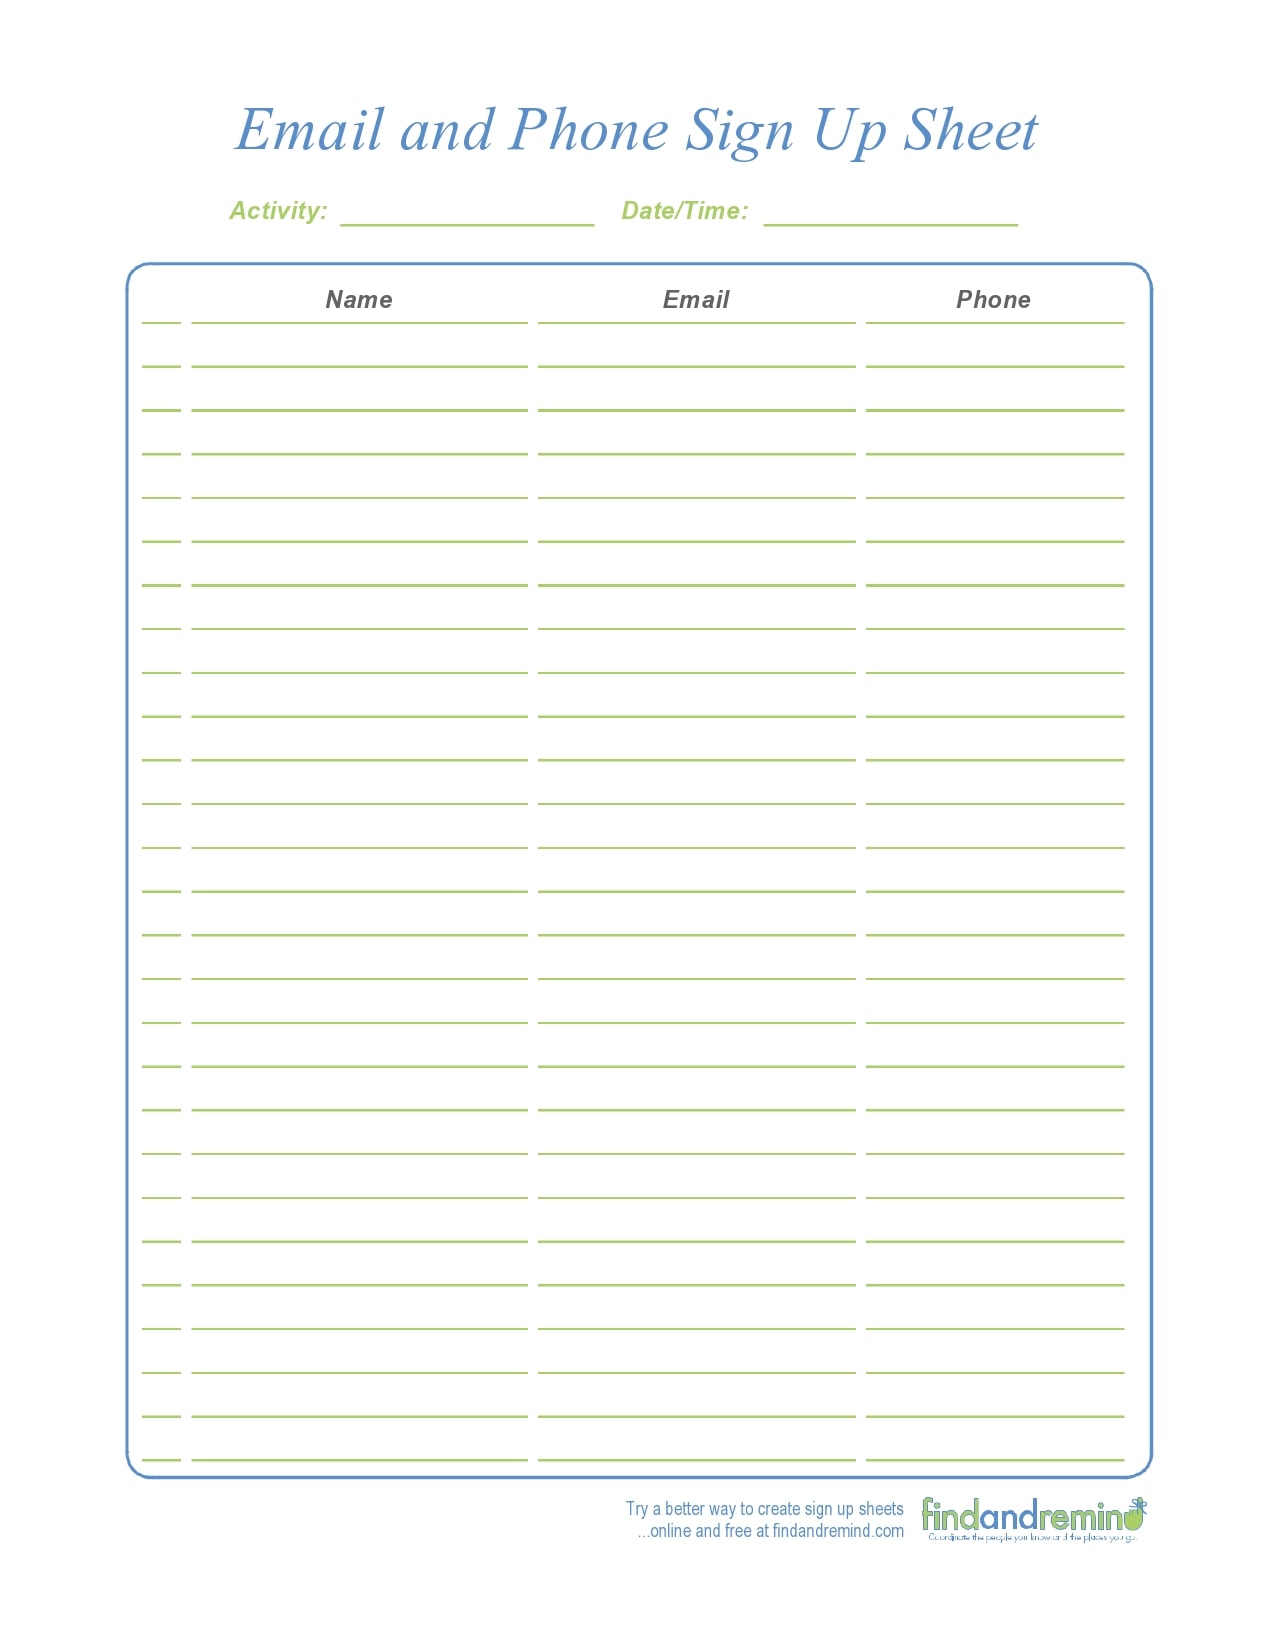 printable-email-signup-form-template-printable-forms-free-online